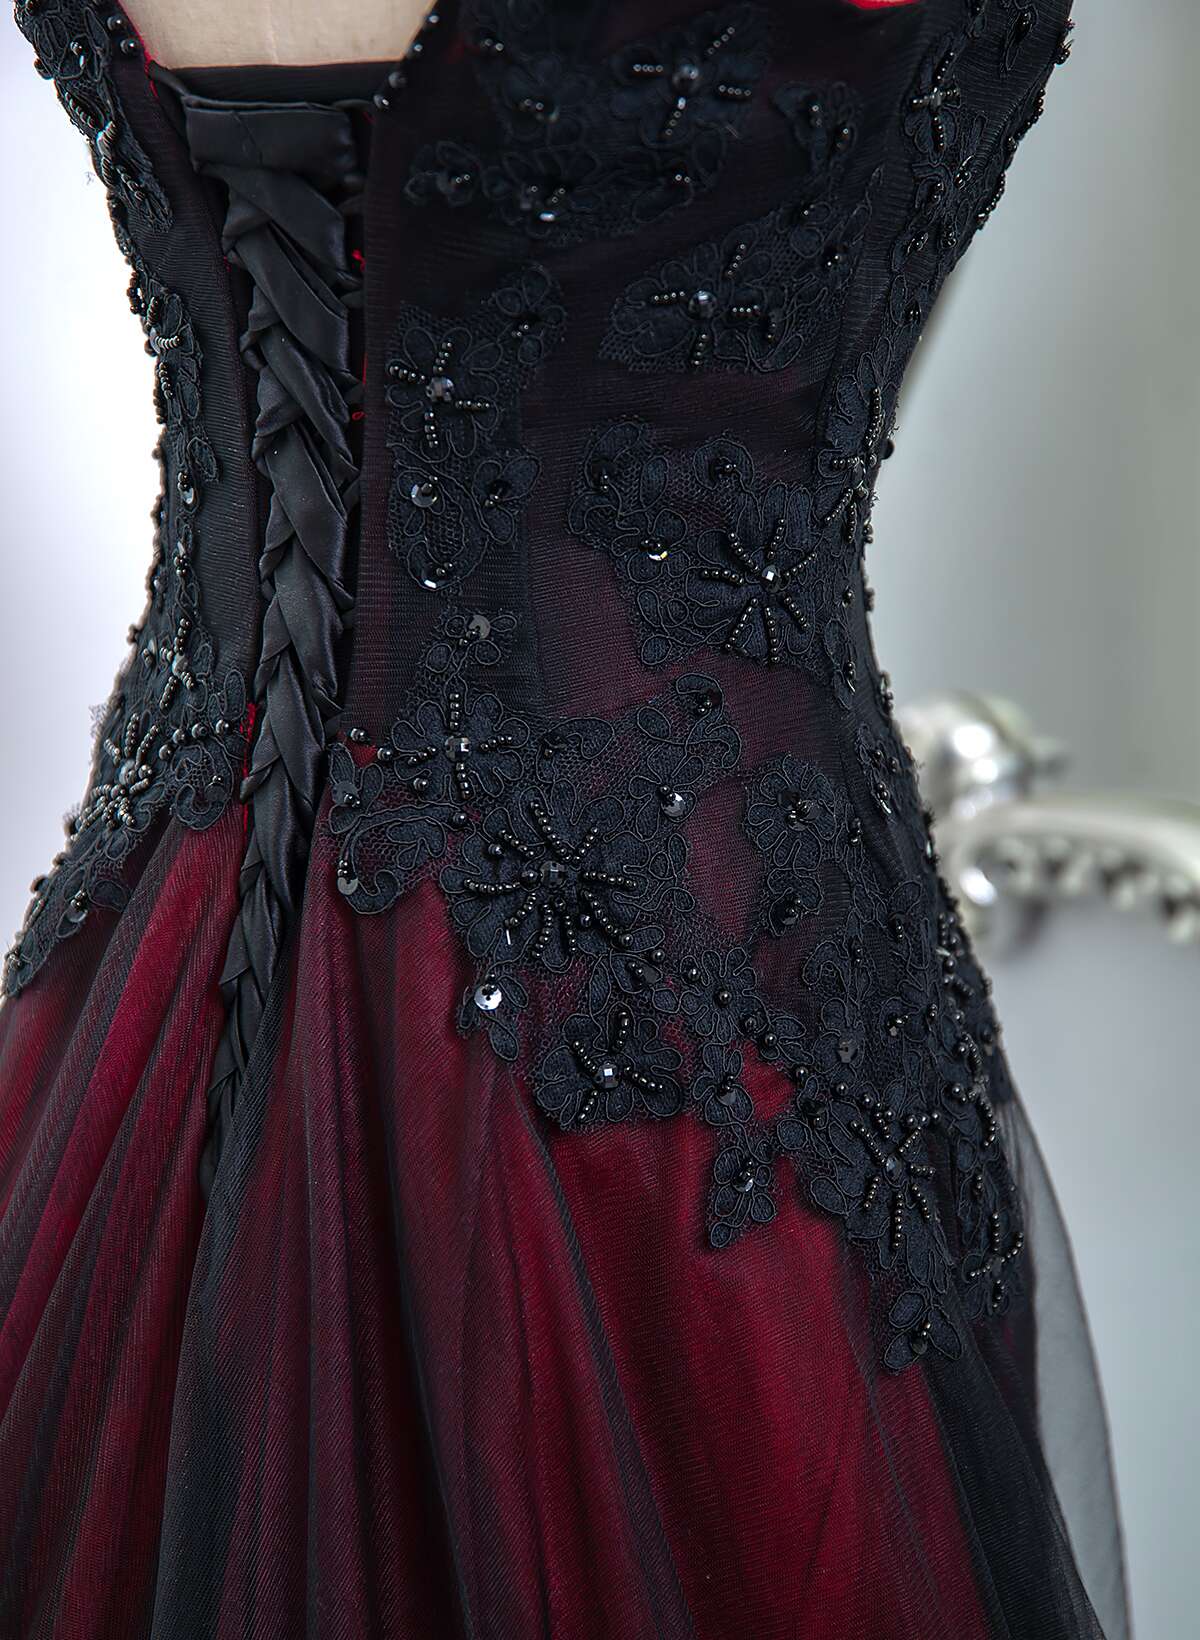 Charming Black and Red Long Formal Dress, Black and Red Evening Dress Prom Dress